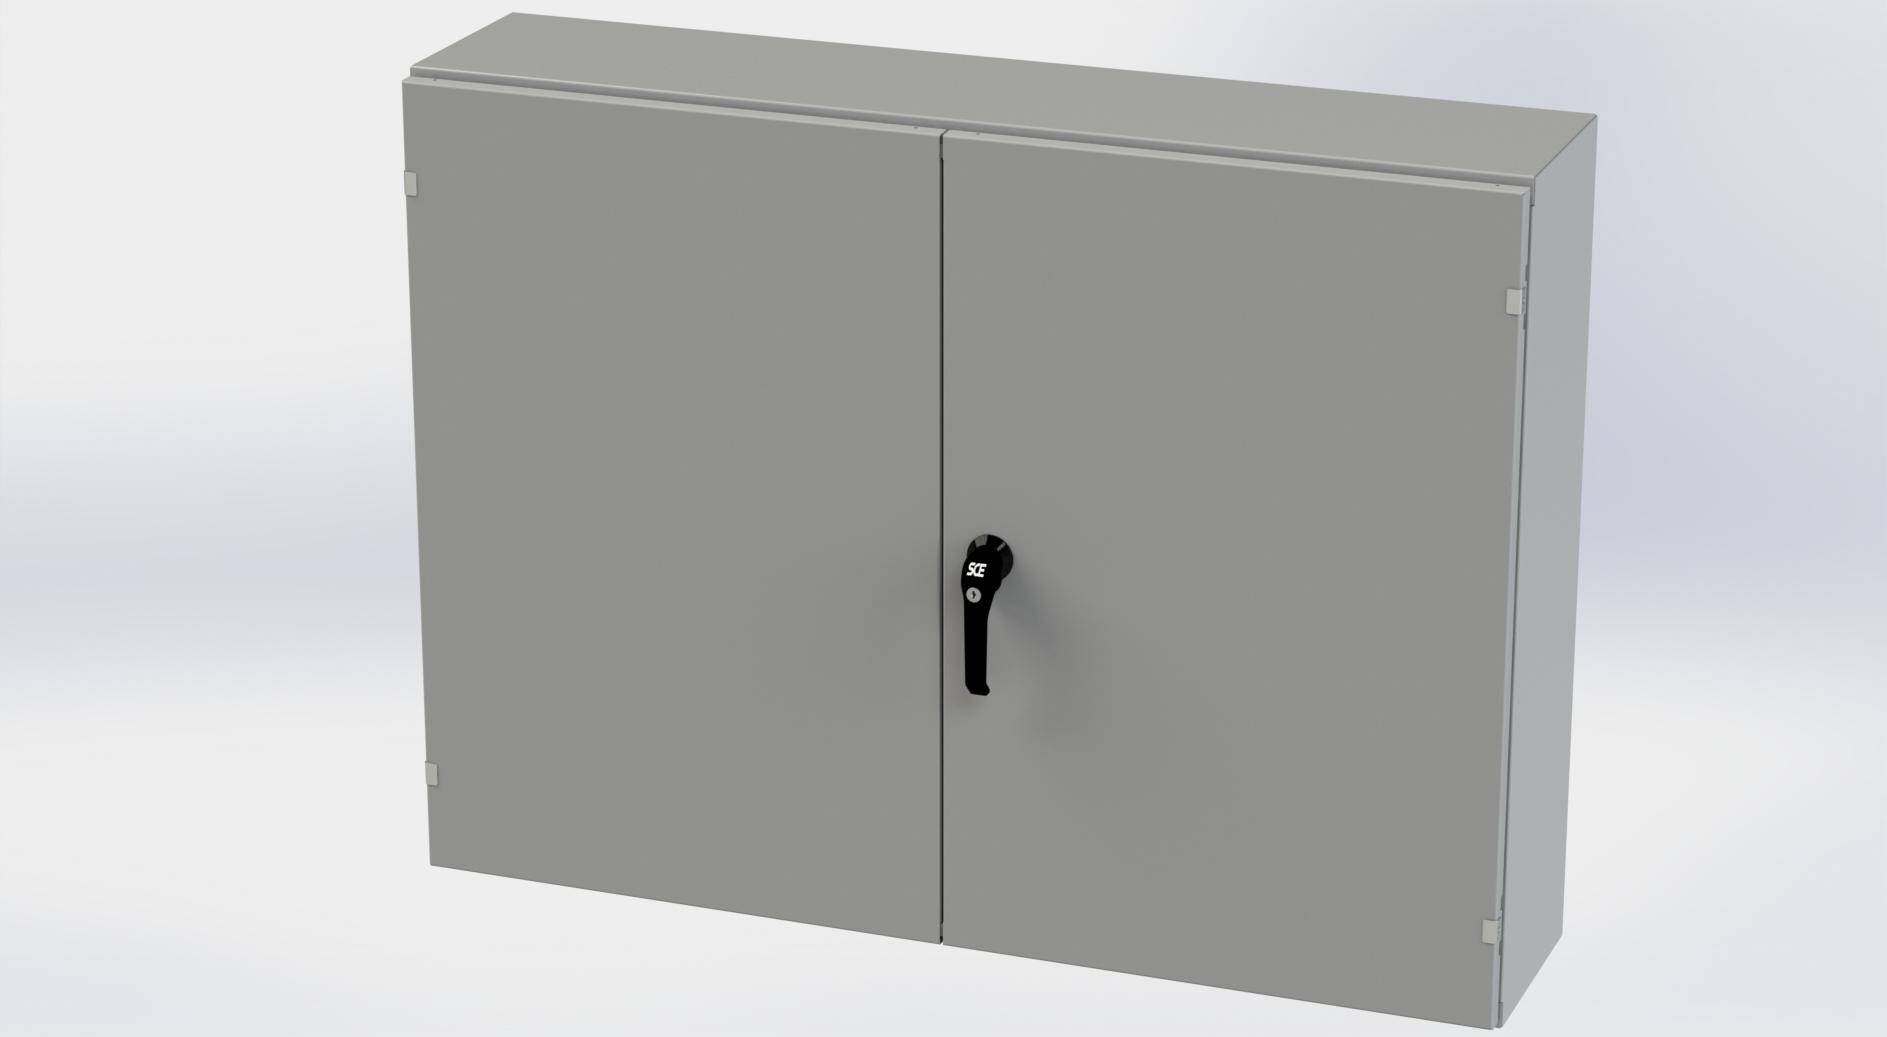 Saginaw Control SCE-364810WFLP WFLP Enclosure, Height:36.00", Width:48.00", Depth:10.00", ANSI-61 gray powder coating inside and out.